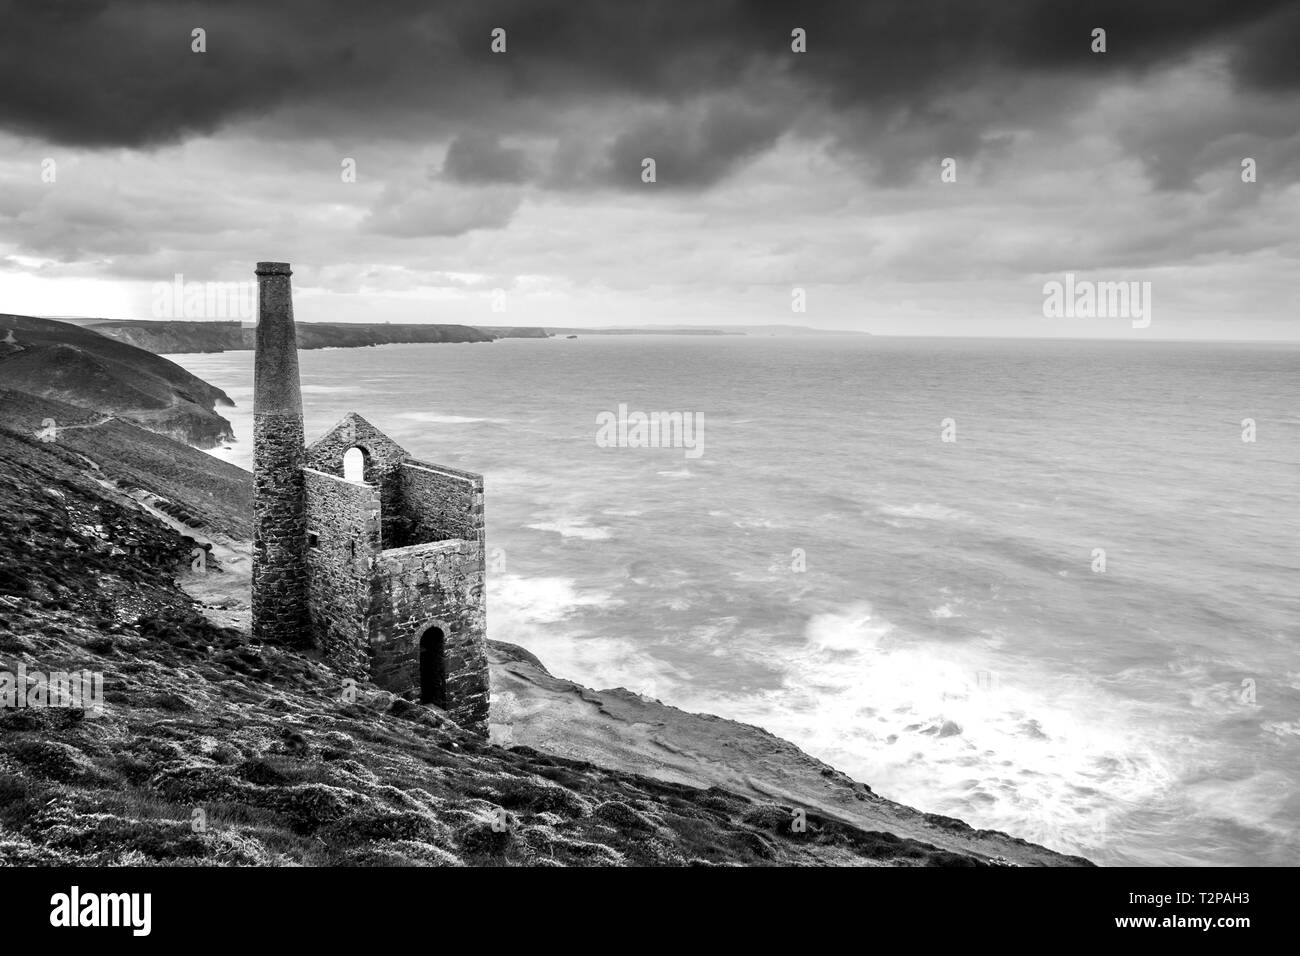 The Towanroath mine shaft at Wheal Coates, on the St Agnes coastline in Cornwall, gives this epic composition with the beautiful rugged Cornish coast Stock Photo